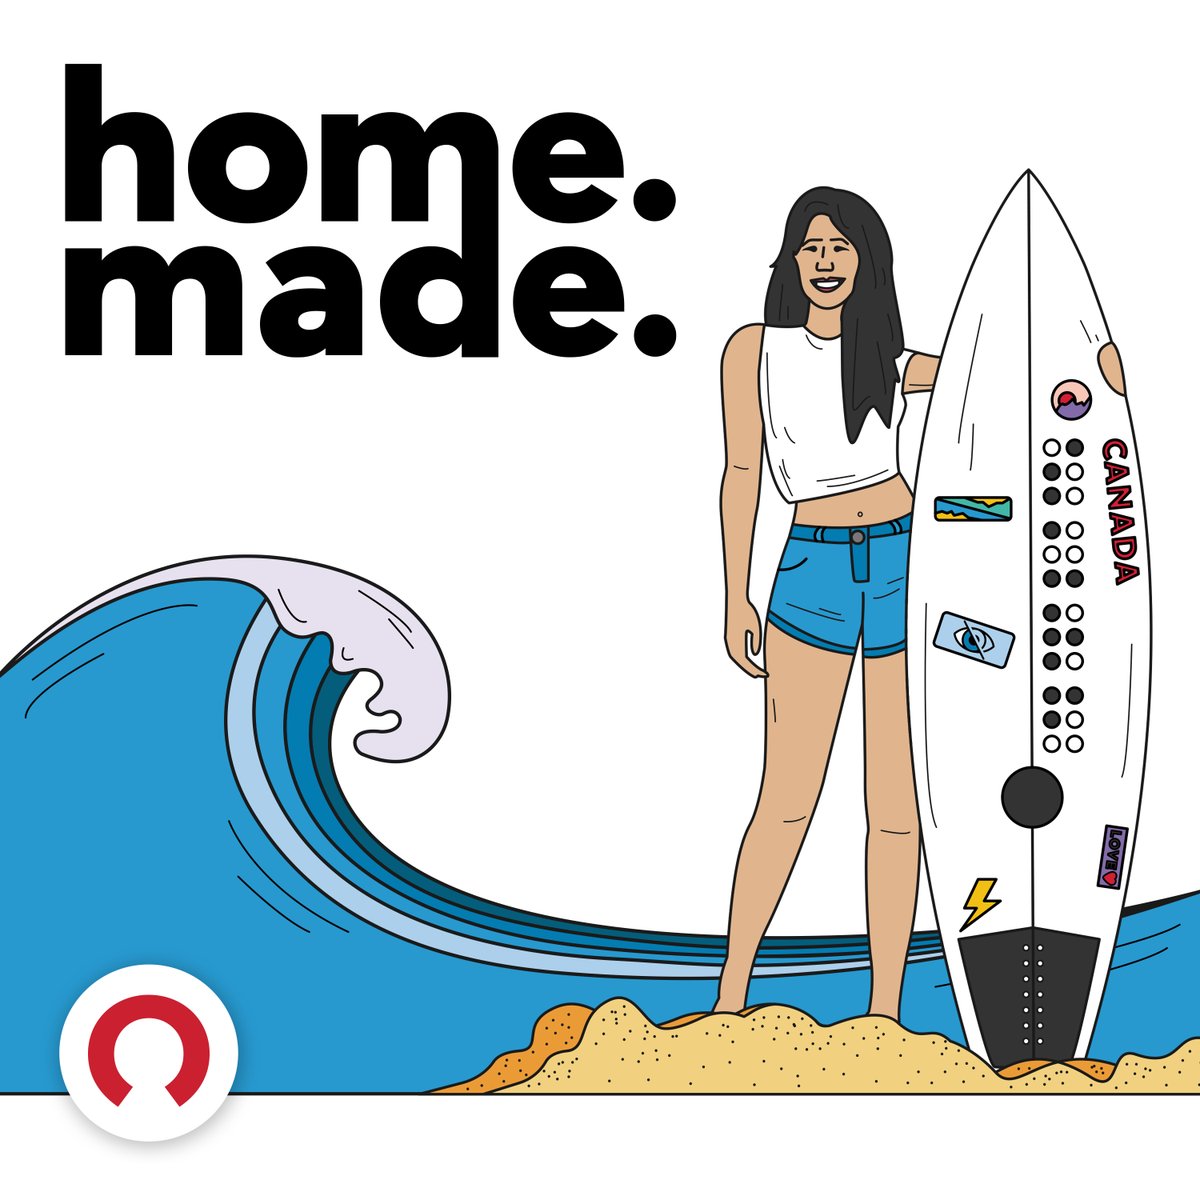 Some of the most important stories are small ones about the way we live our lives. That's the core of 'Home Made' a series I edited w/ a stellar team @pacificcontent. Kevin Ball @pippajohnstone @aahearn @skk_wire @domideas @stephaniefoooo. Bravo y'all! podcasts.apple.com/us/podcast/the…